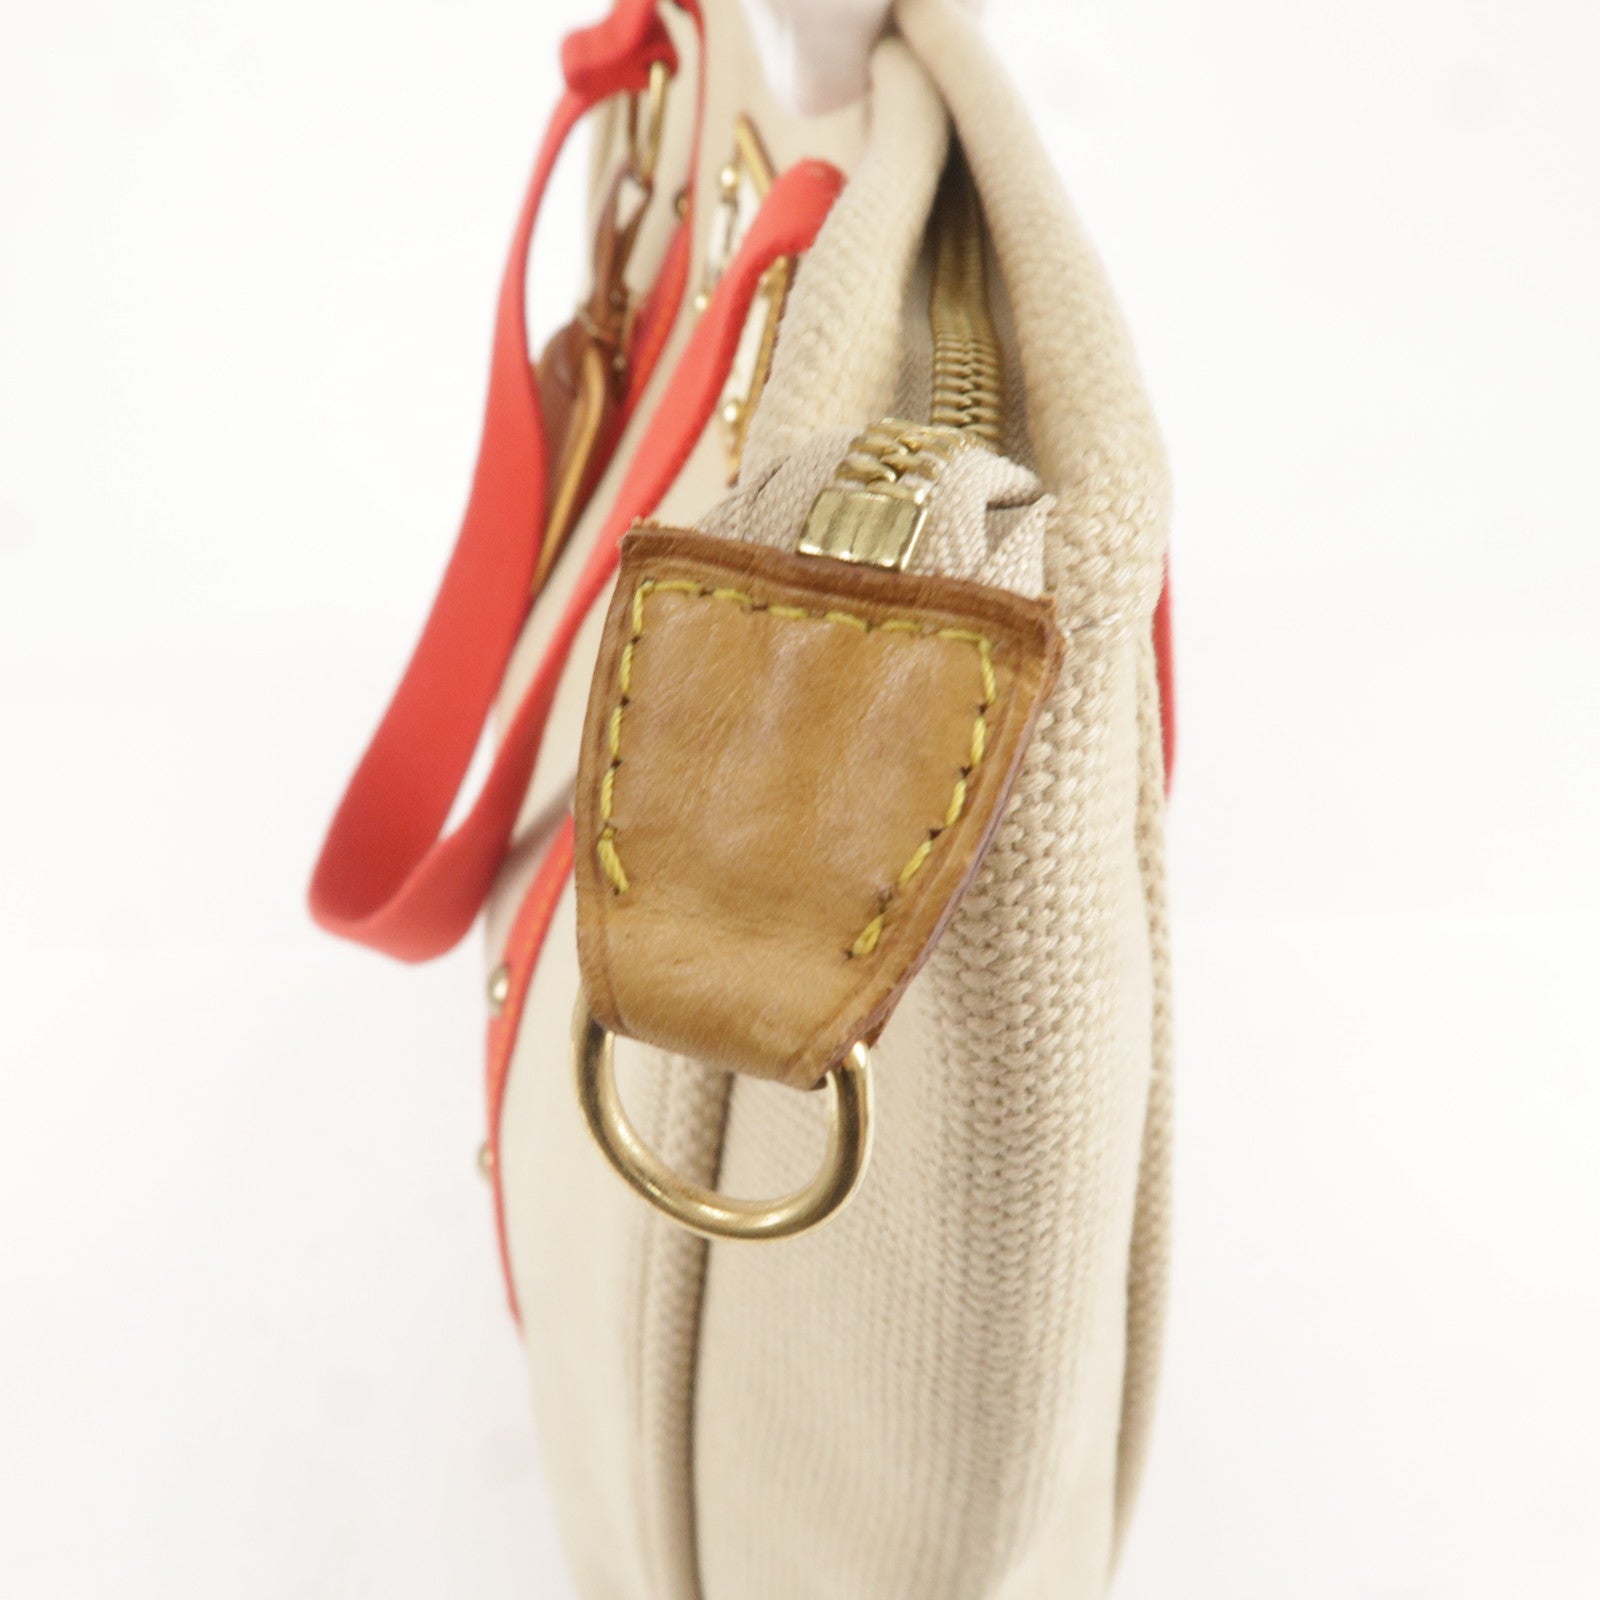 Louis-Vuitton-Antigua-Cabas-GM-Tote-Bag-Hand-Bag-Beige-Red-M40032 –  dct-ep_vintage luxury Store